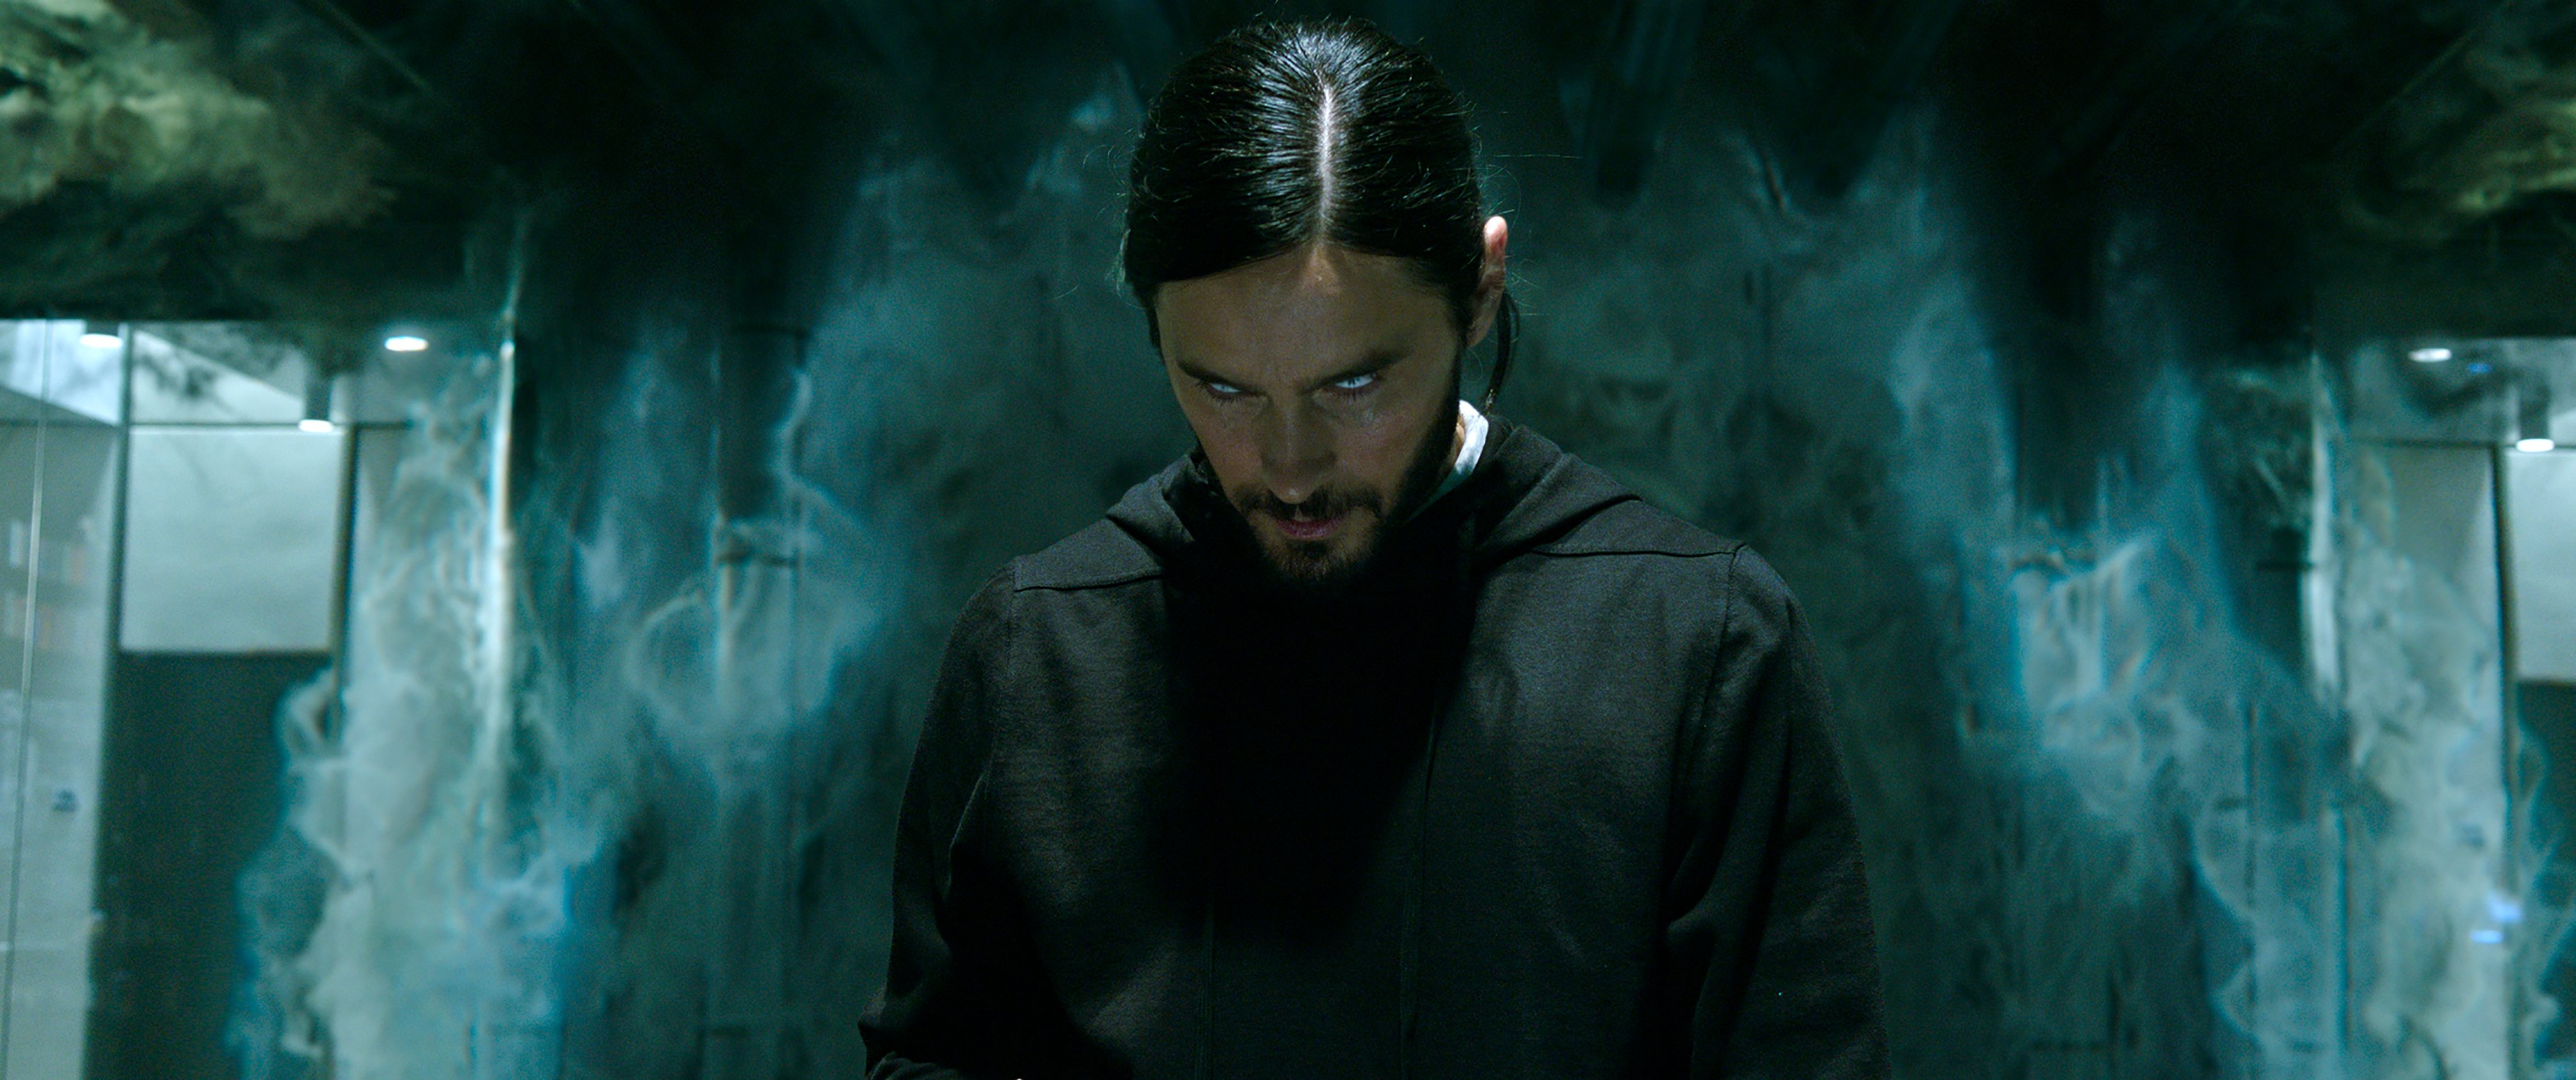 Jared Leto as Dr Michael Morbius in a still from Morbius.